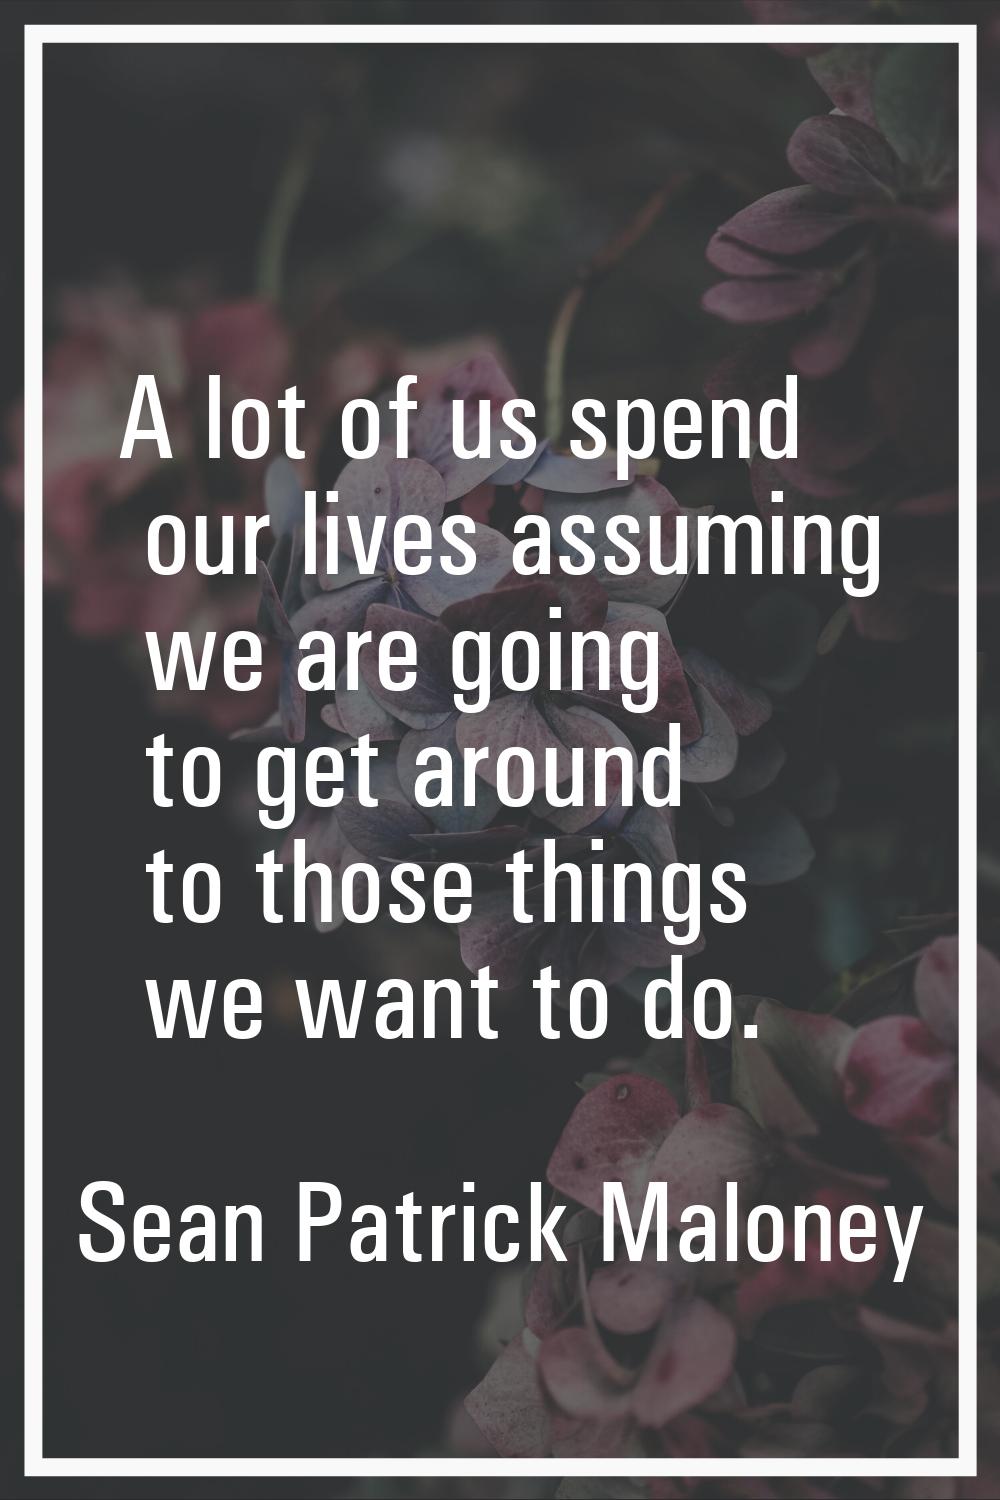 A lot of us spend our lives assuming we are going to get around to those things we want to do.